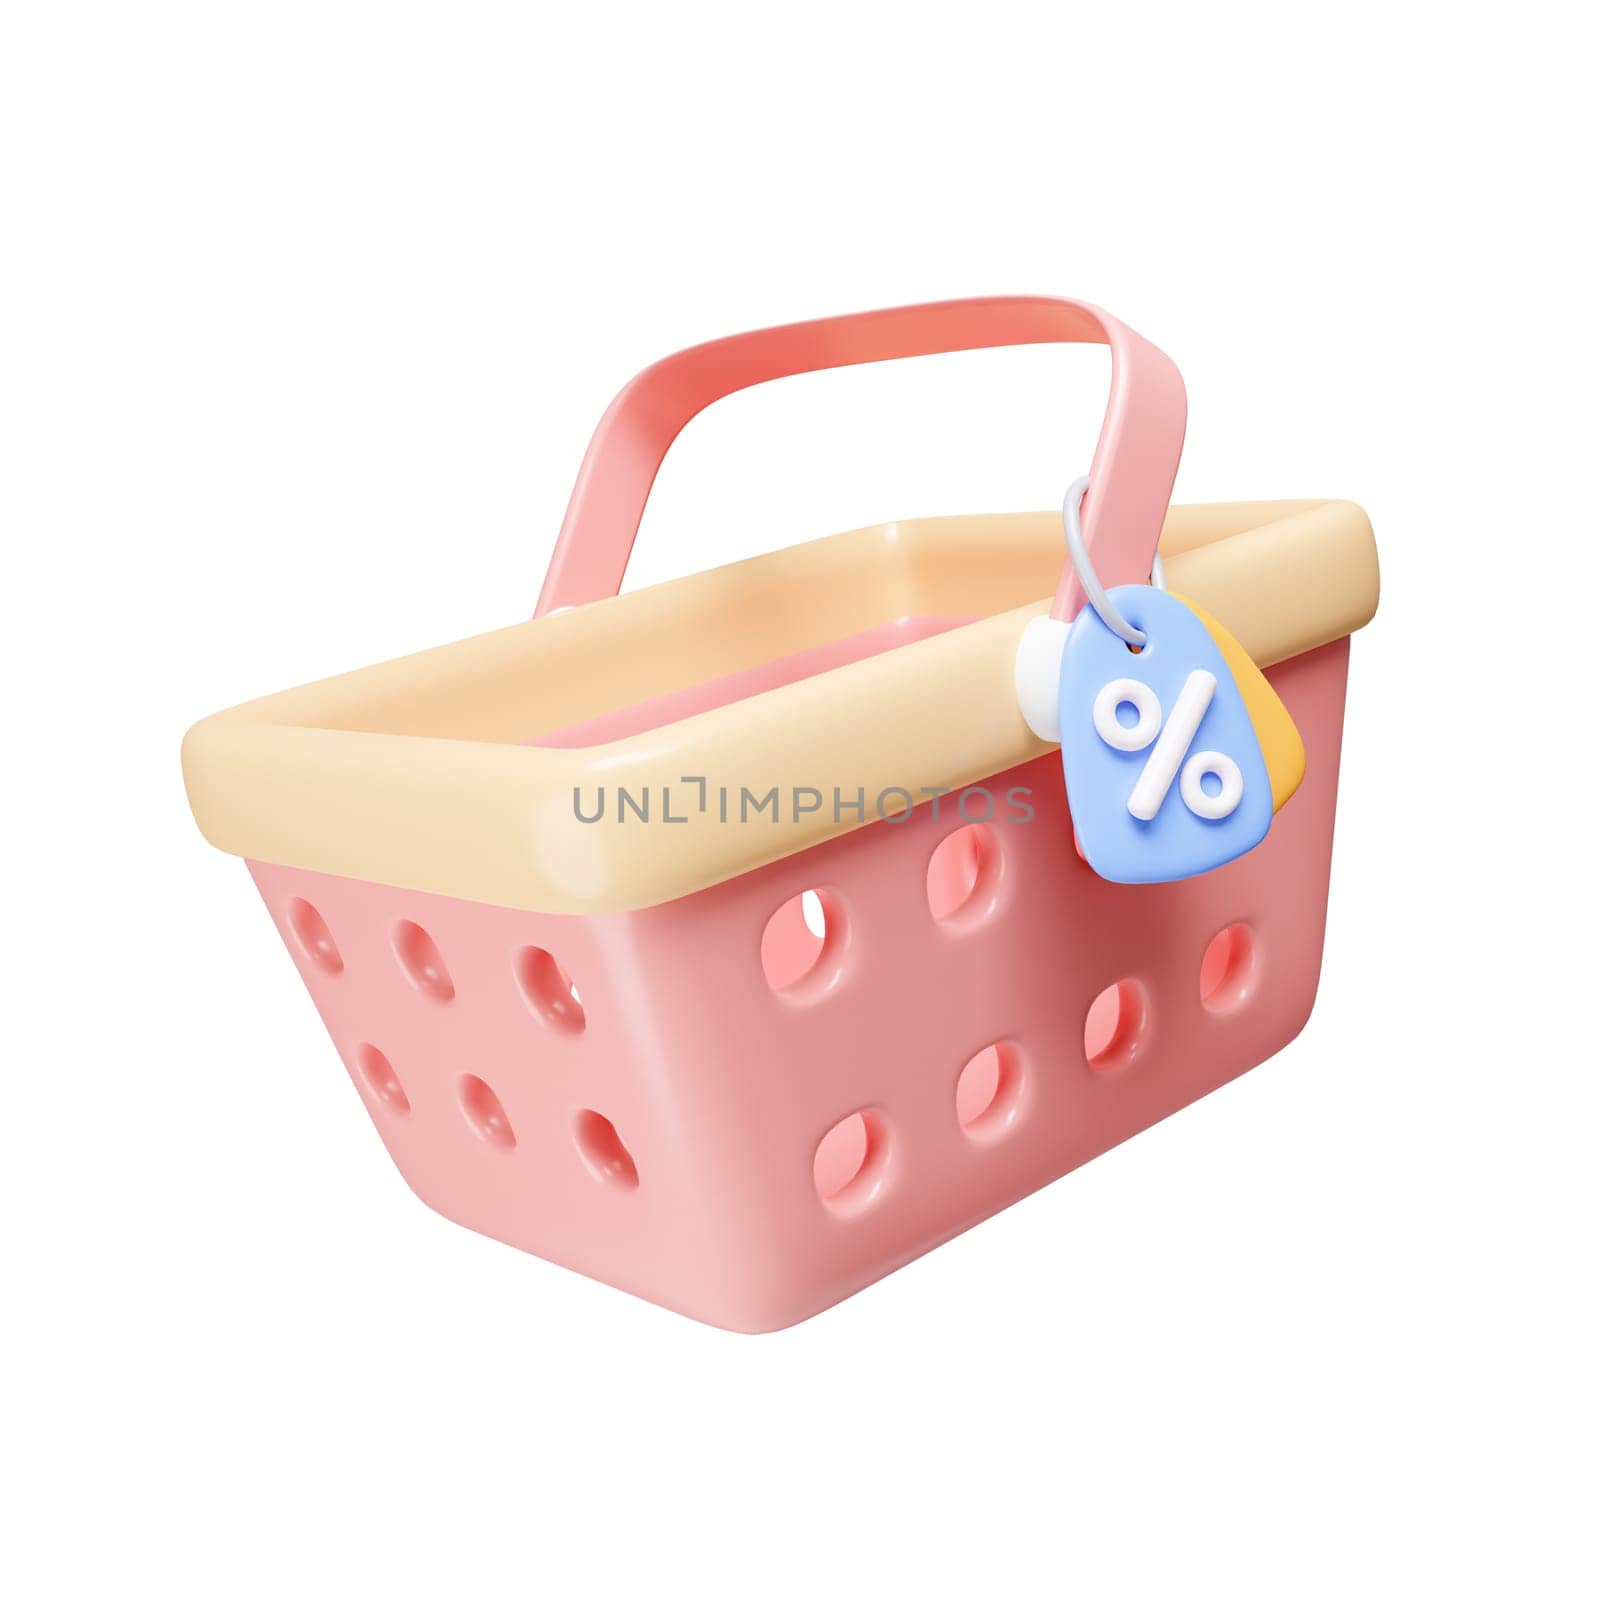 3d basket shopping with price tags for online shopping and supermarket. discount coupon of cash, special offer promotion. icon isolated on white background. 3d rendering illustration. Clipping path. by meepiangraphic